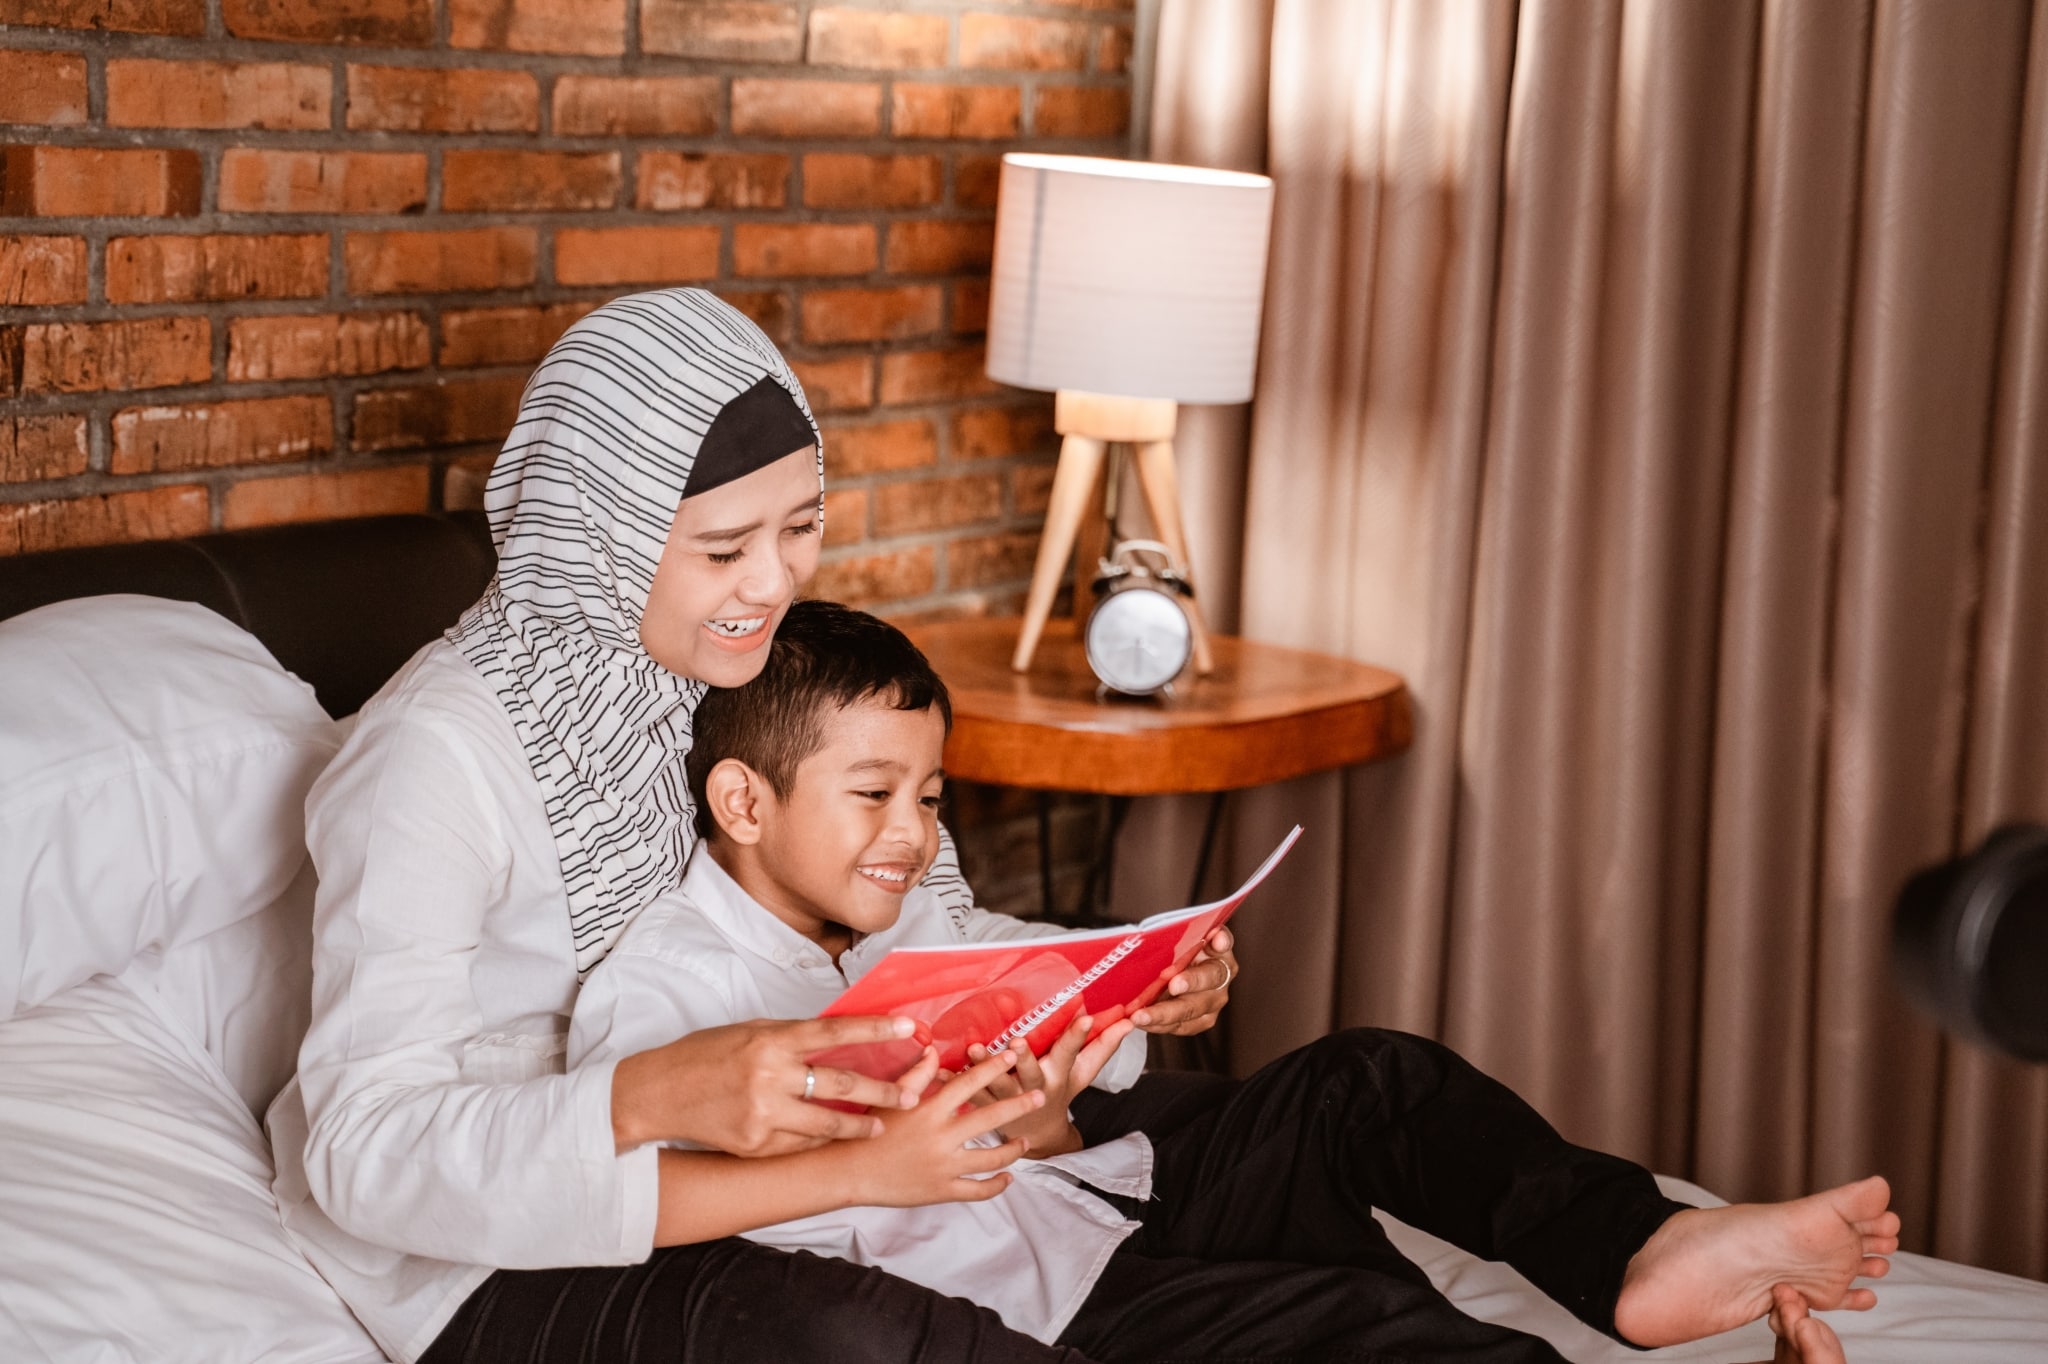 muslim mother reading a book with her son